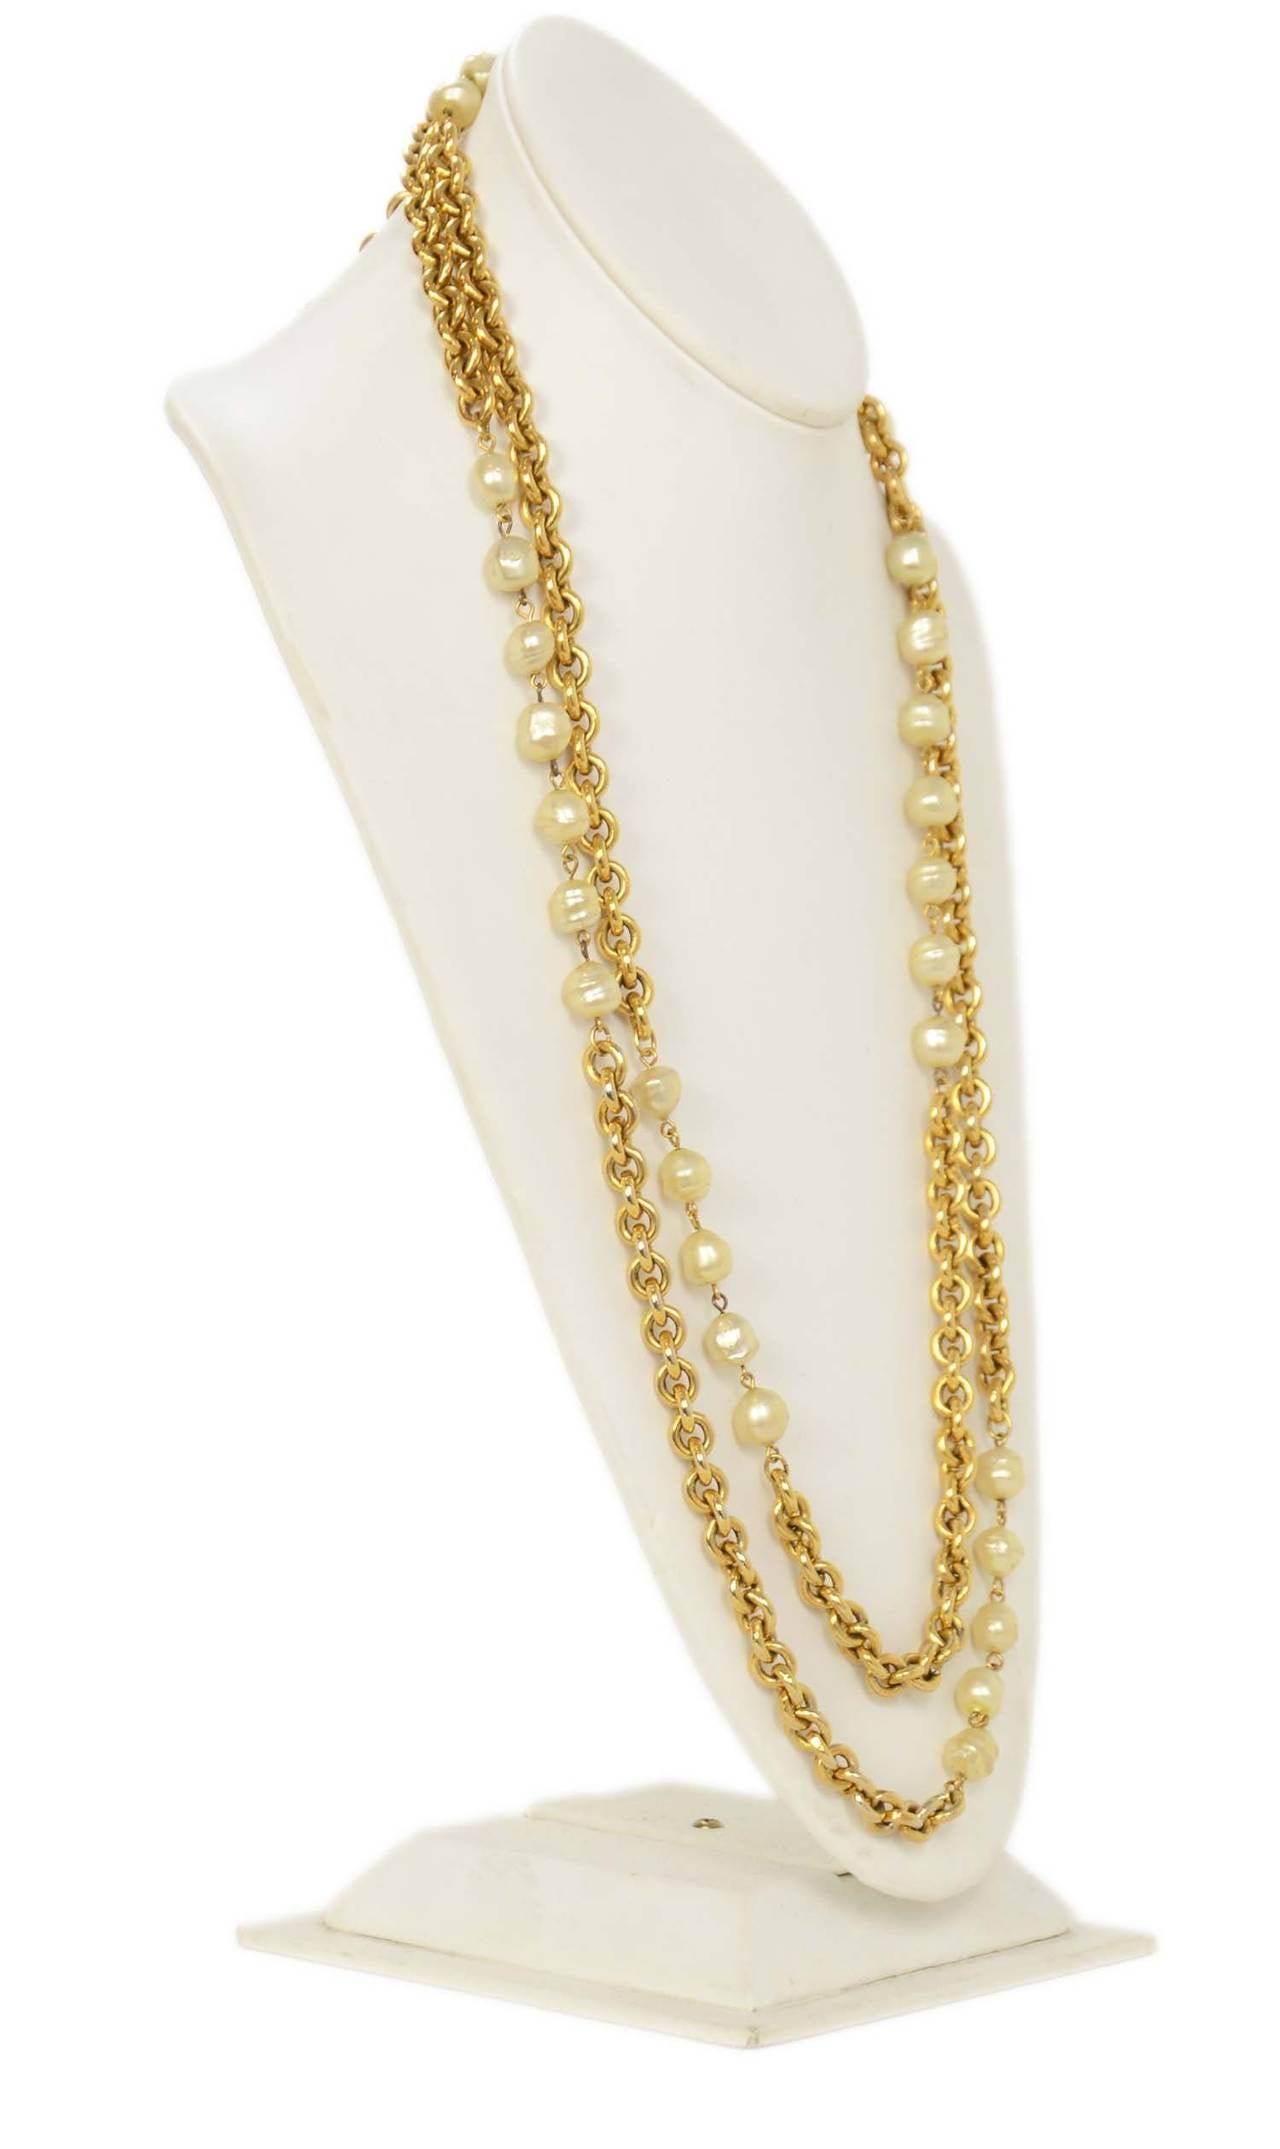 Chanel Vintage '84 Gold & Pearl Double Strand Necklace

    Made in: France
    Year of Production: 1984
    Stamp: CHANEL CC 1984
    Closure: Jump ring closure
    Color: Gold and ivory
    Materials: Metal and faux pearls
    Overall